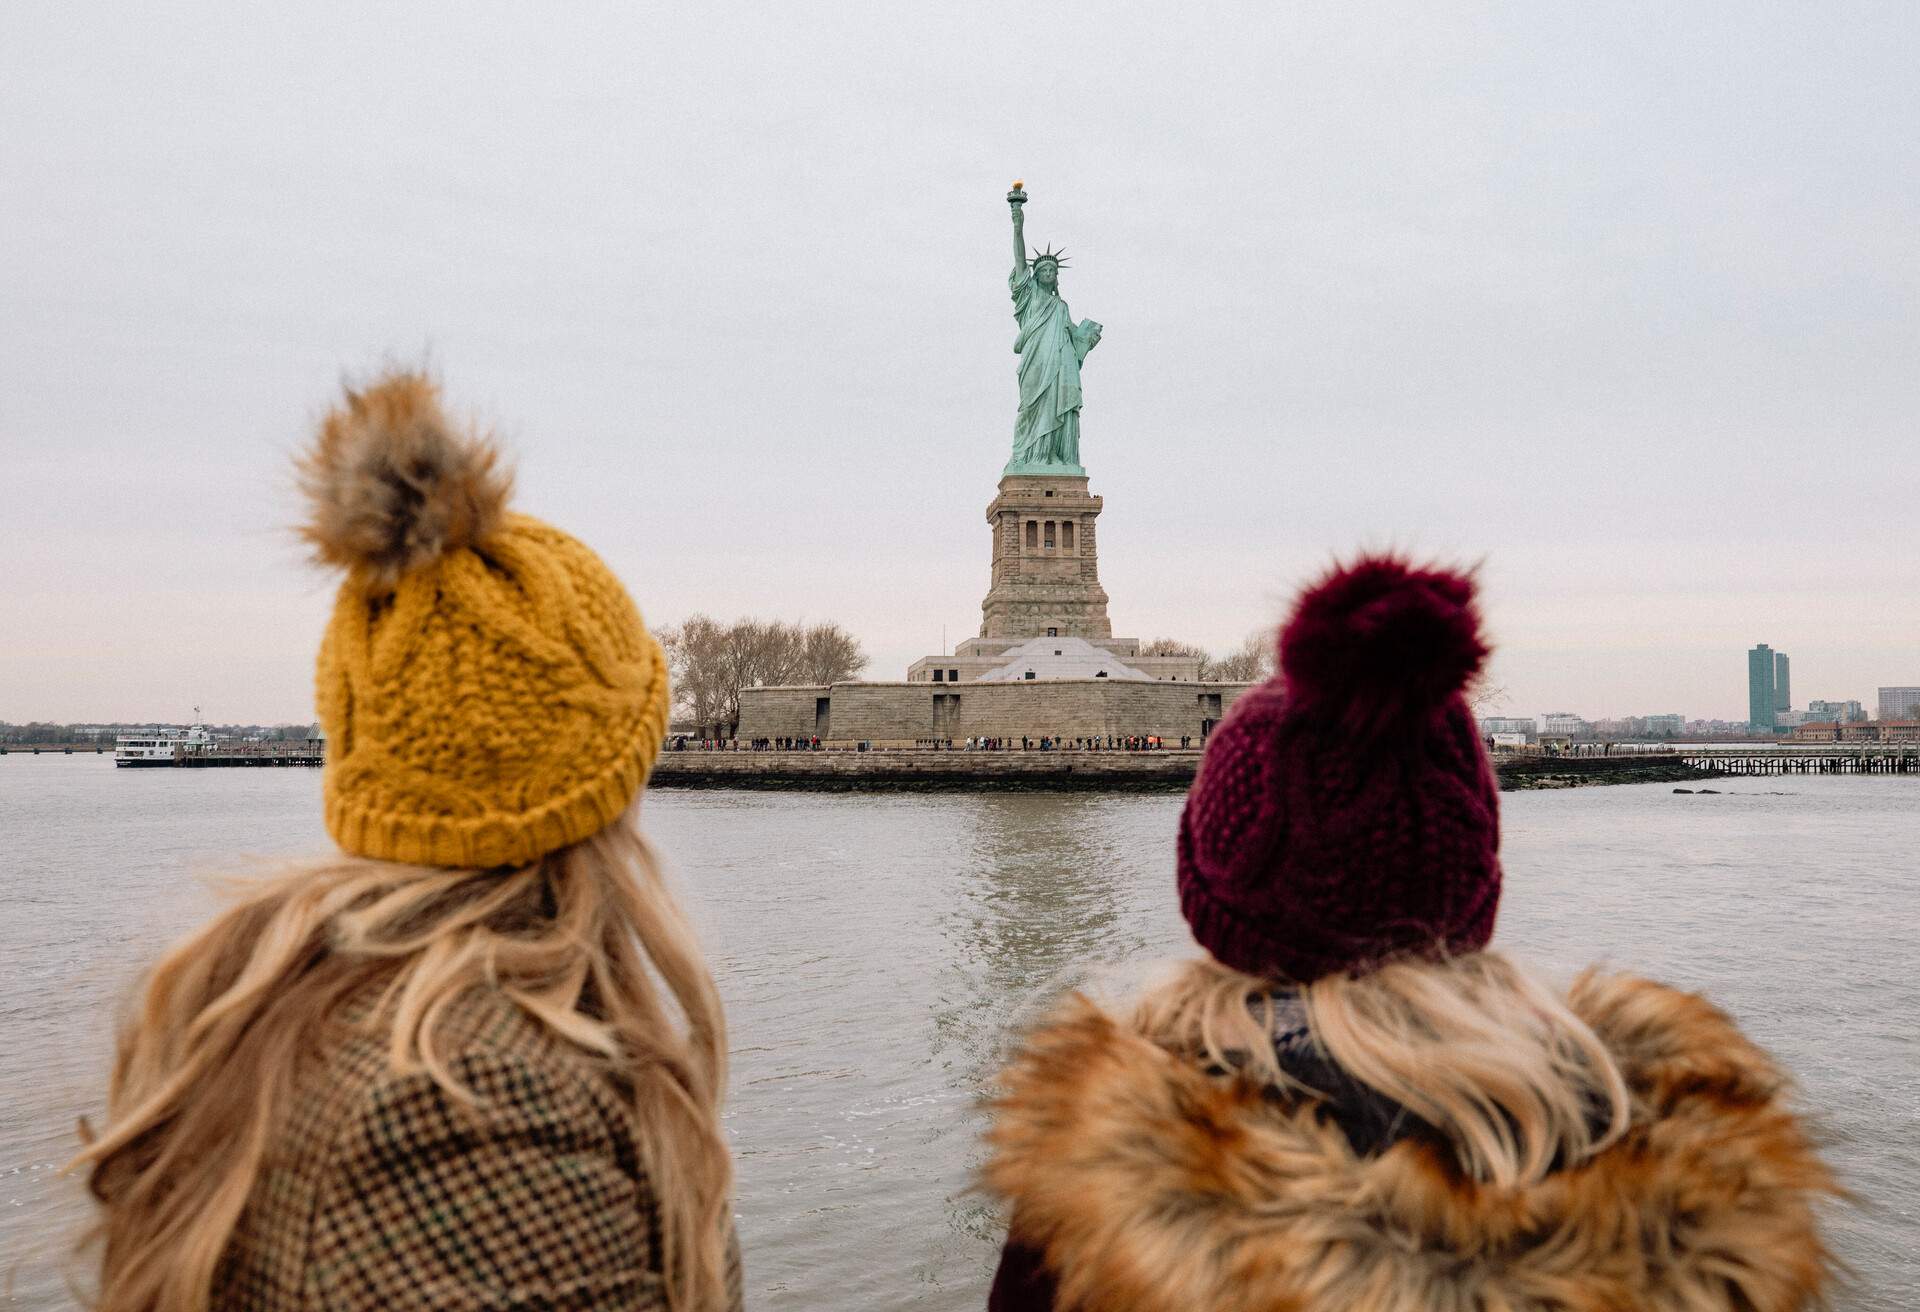 DEST_USA_AMERICA_NEW_YORK_STATUE_OF_LIBERTY_PEOPLE_WOMEN_WINTER_GettyImages-1129344019